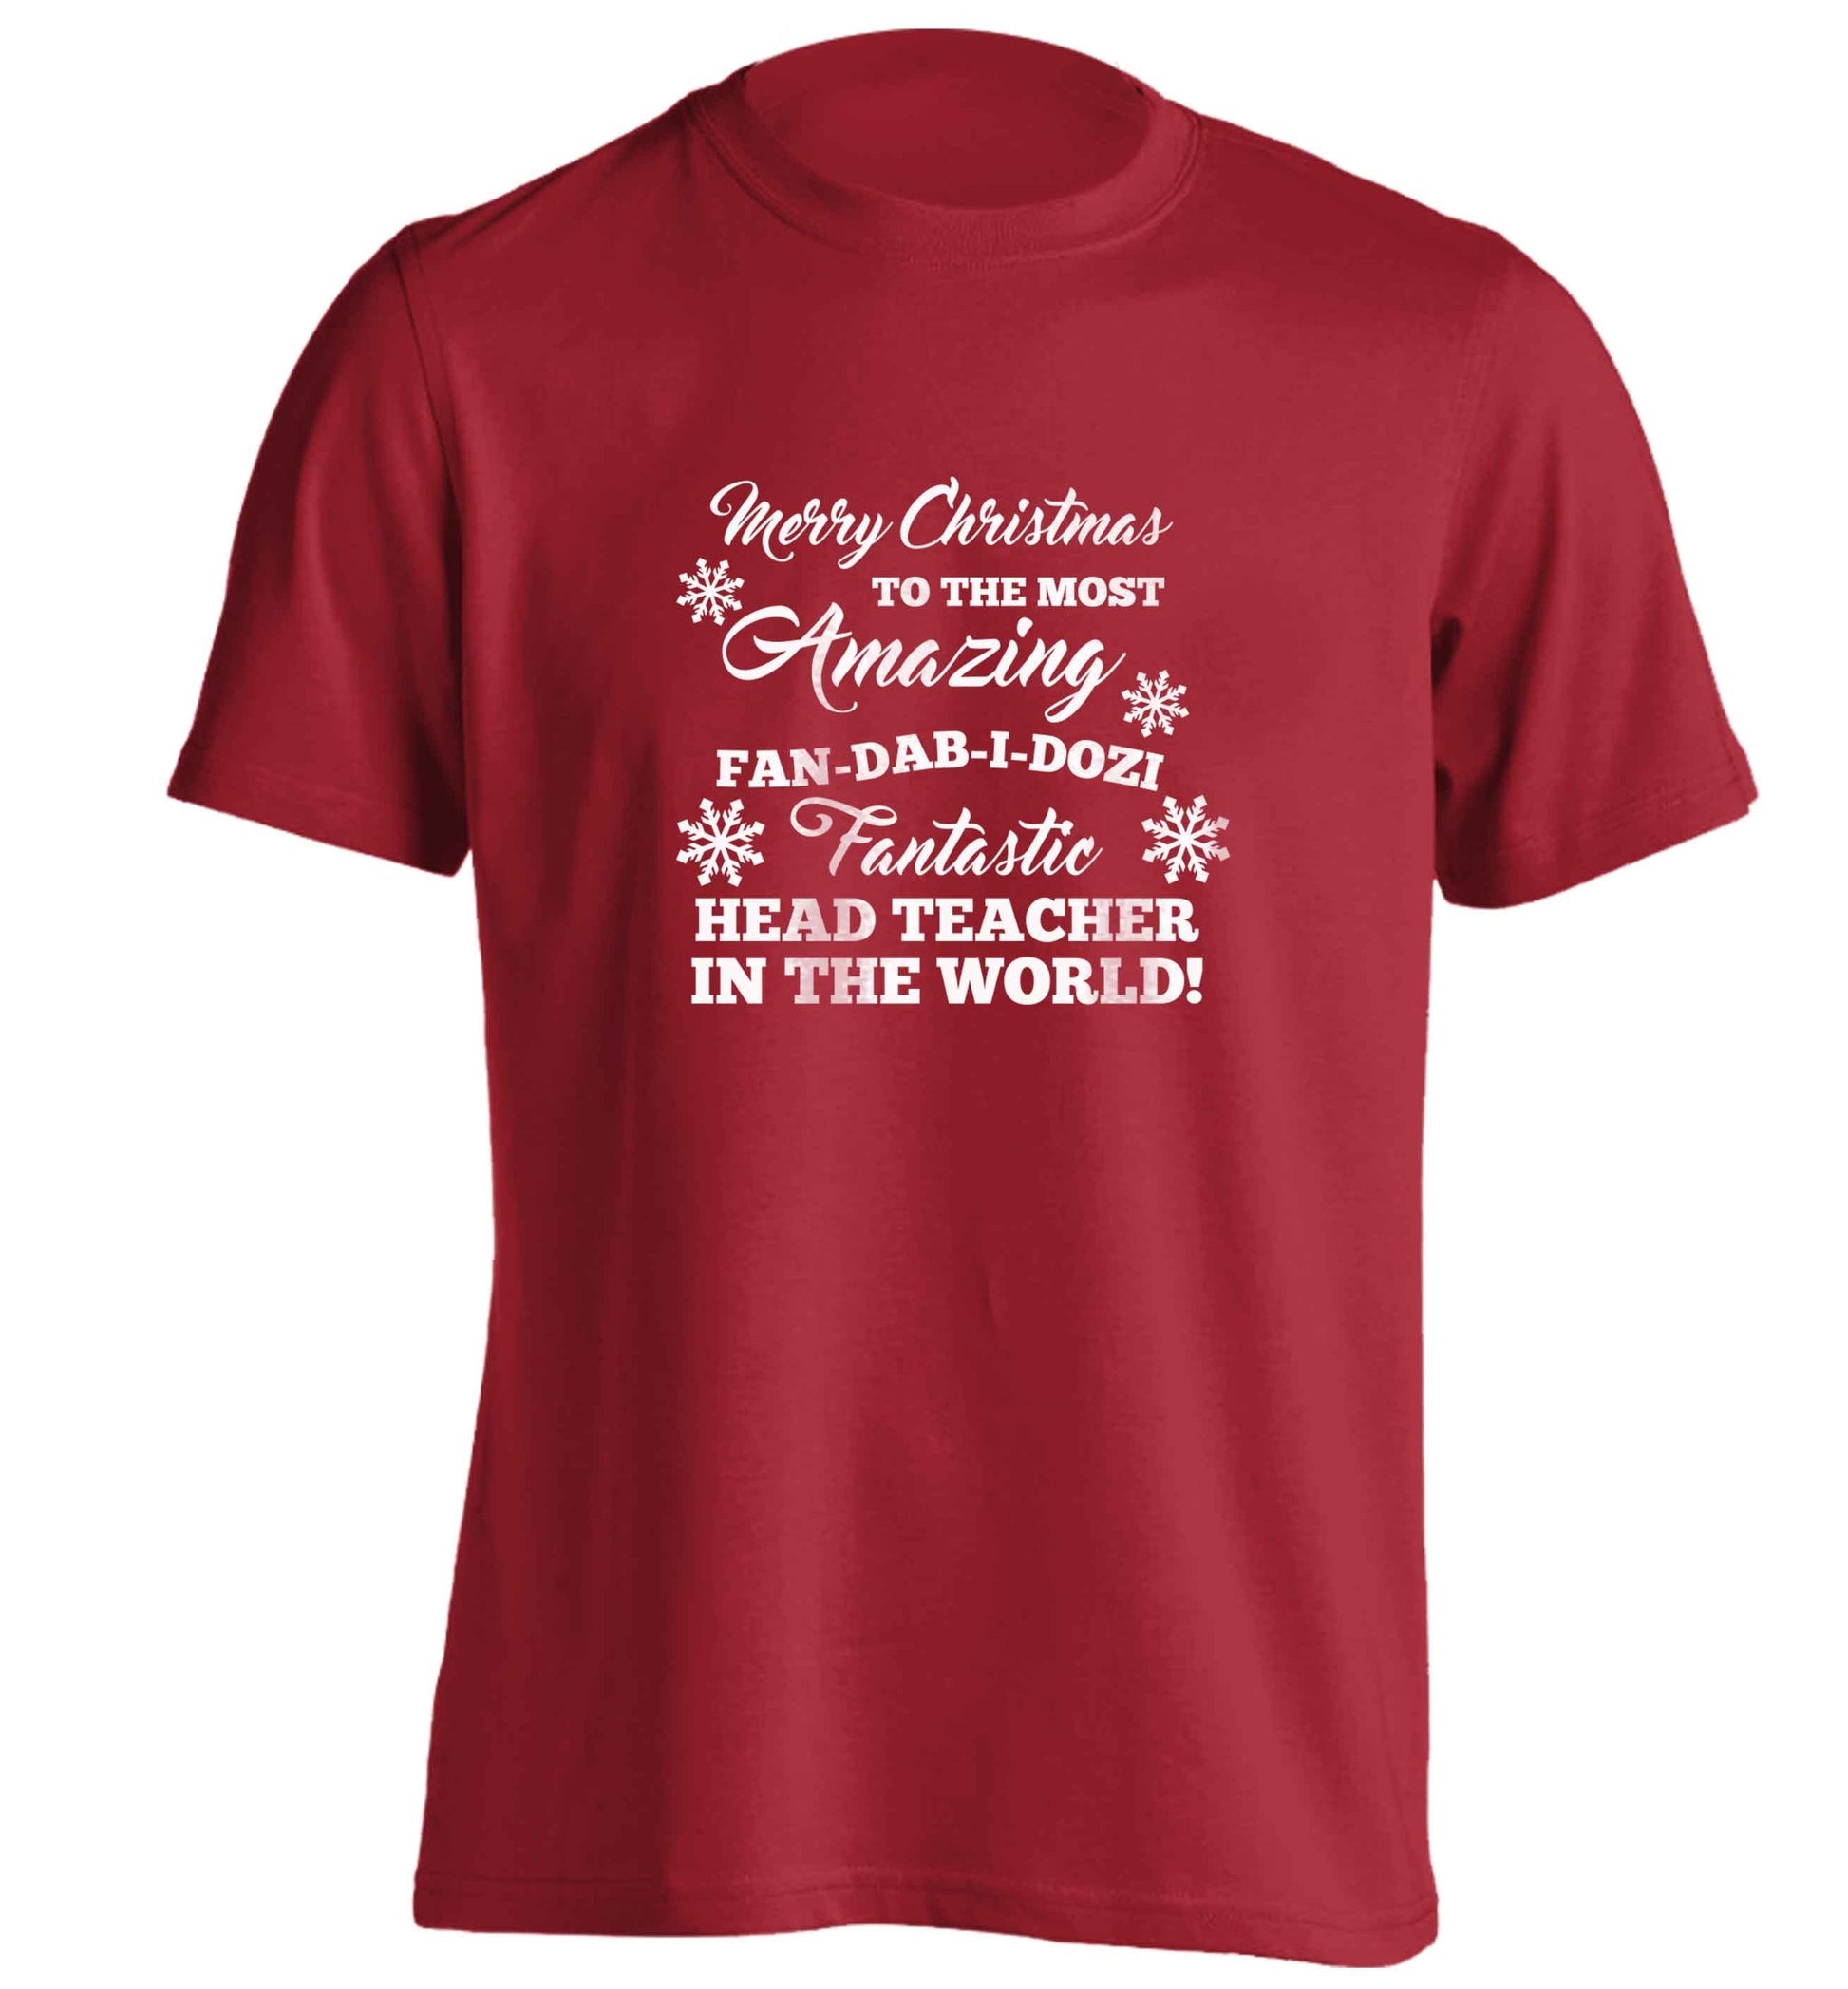 Merry Christmas to the most amazing fan-dab-i-dozi fantasic head teacher in the world adults unisex red Tshirt 2XL